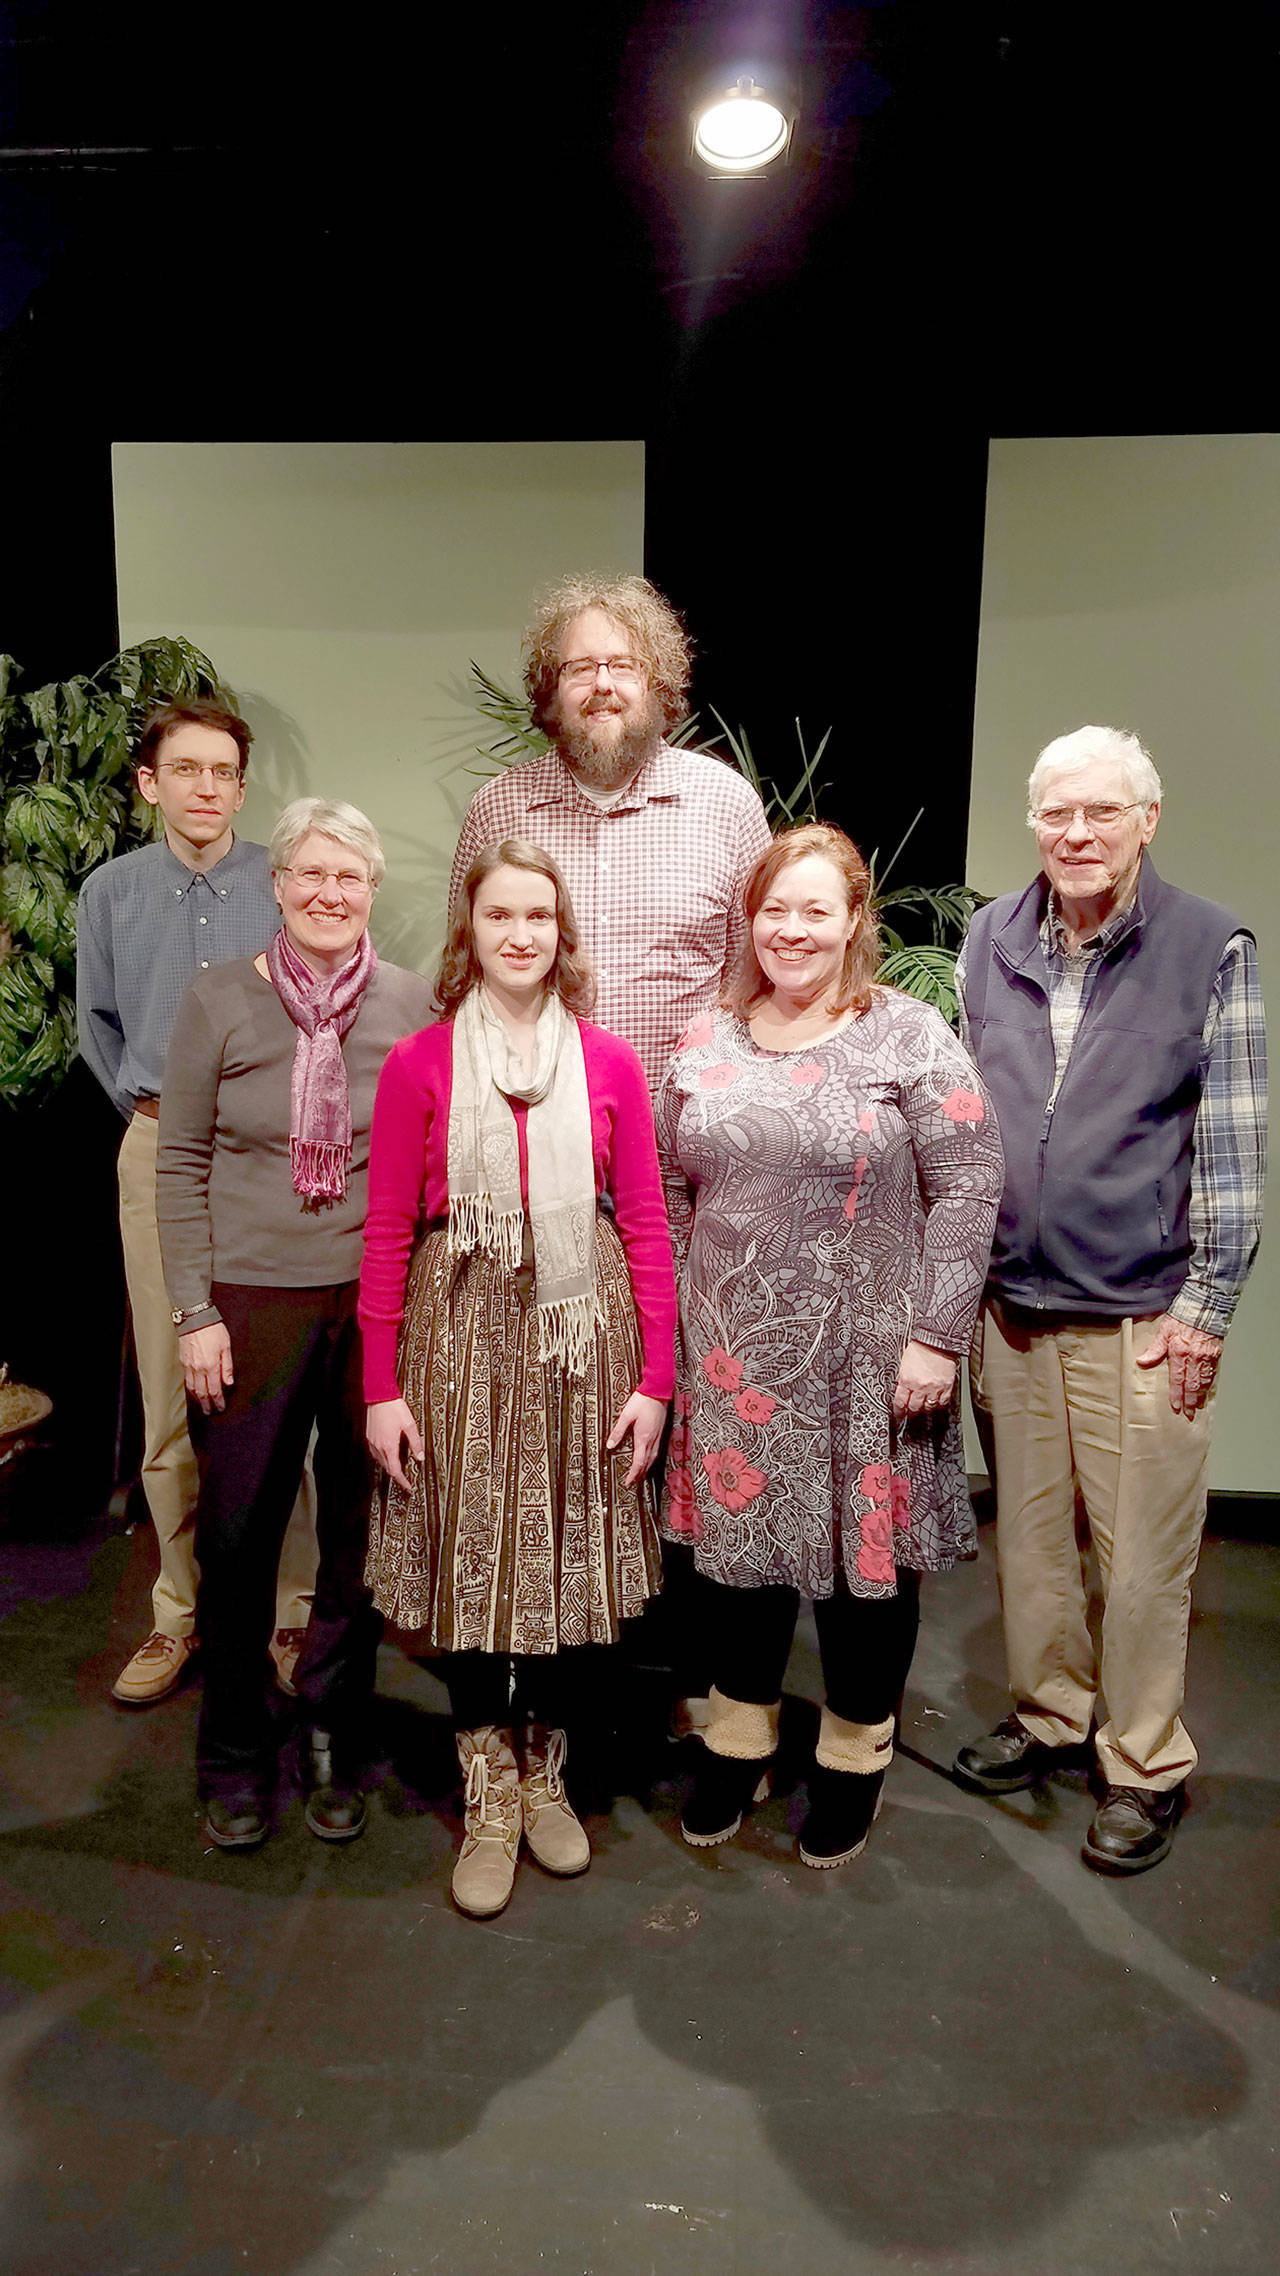 Port Townsend’s PlayFest starts with Locals Weekend, featuring one-act plays by, from left, Doug Given, Deborah Wiese, Christopher Clow, Lillie Moses, Kimberly Hinton and David Hundhausen. (Key City Public Theatre)